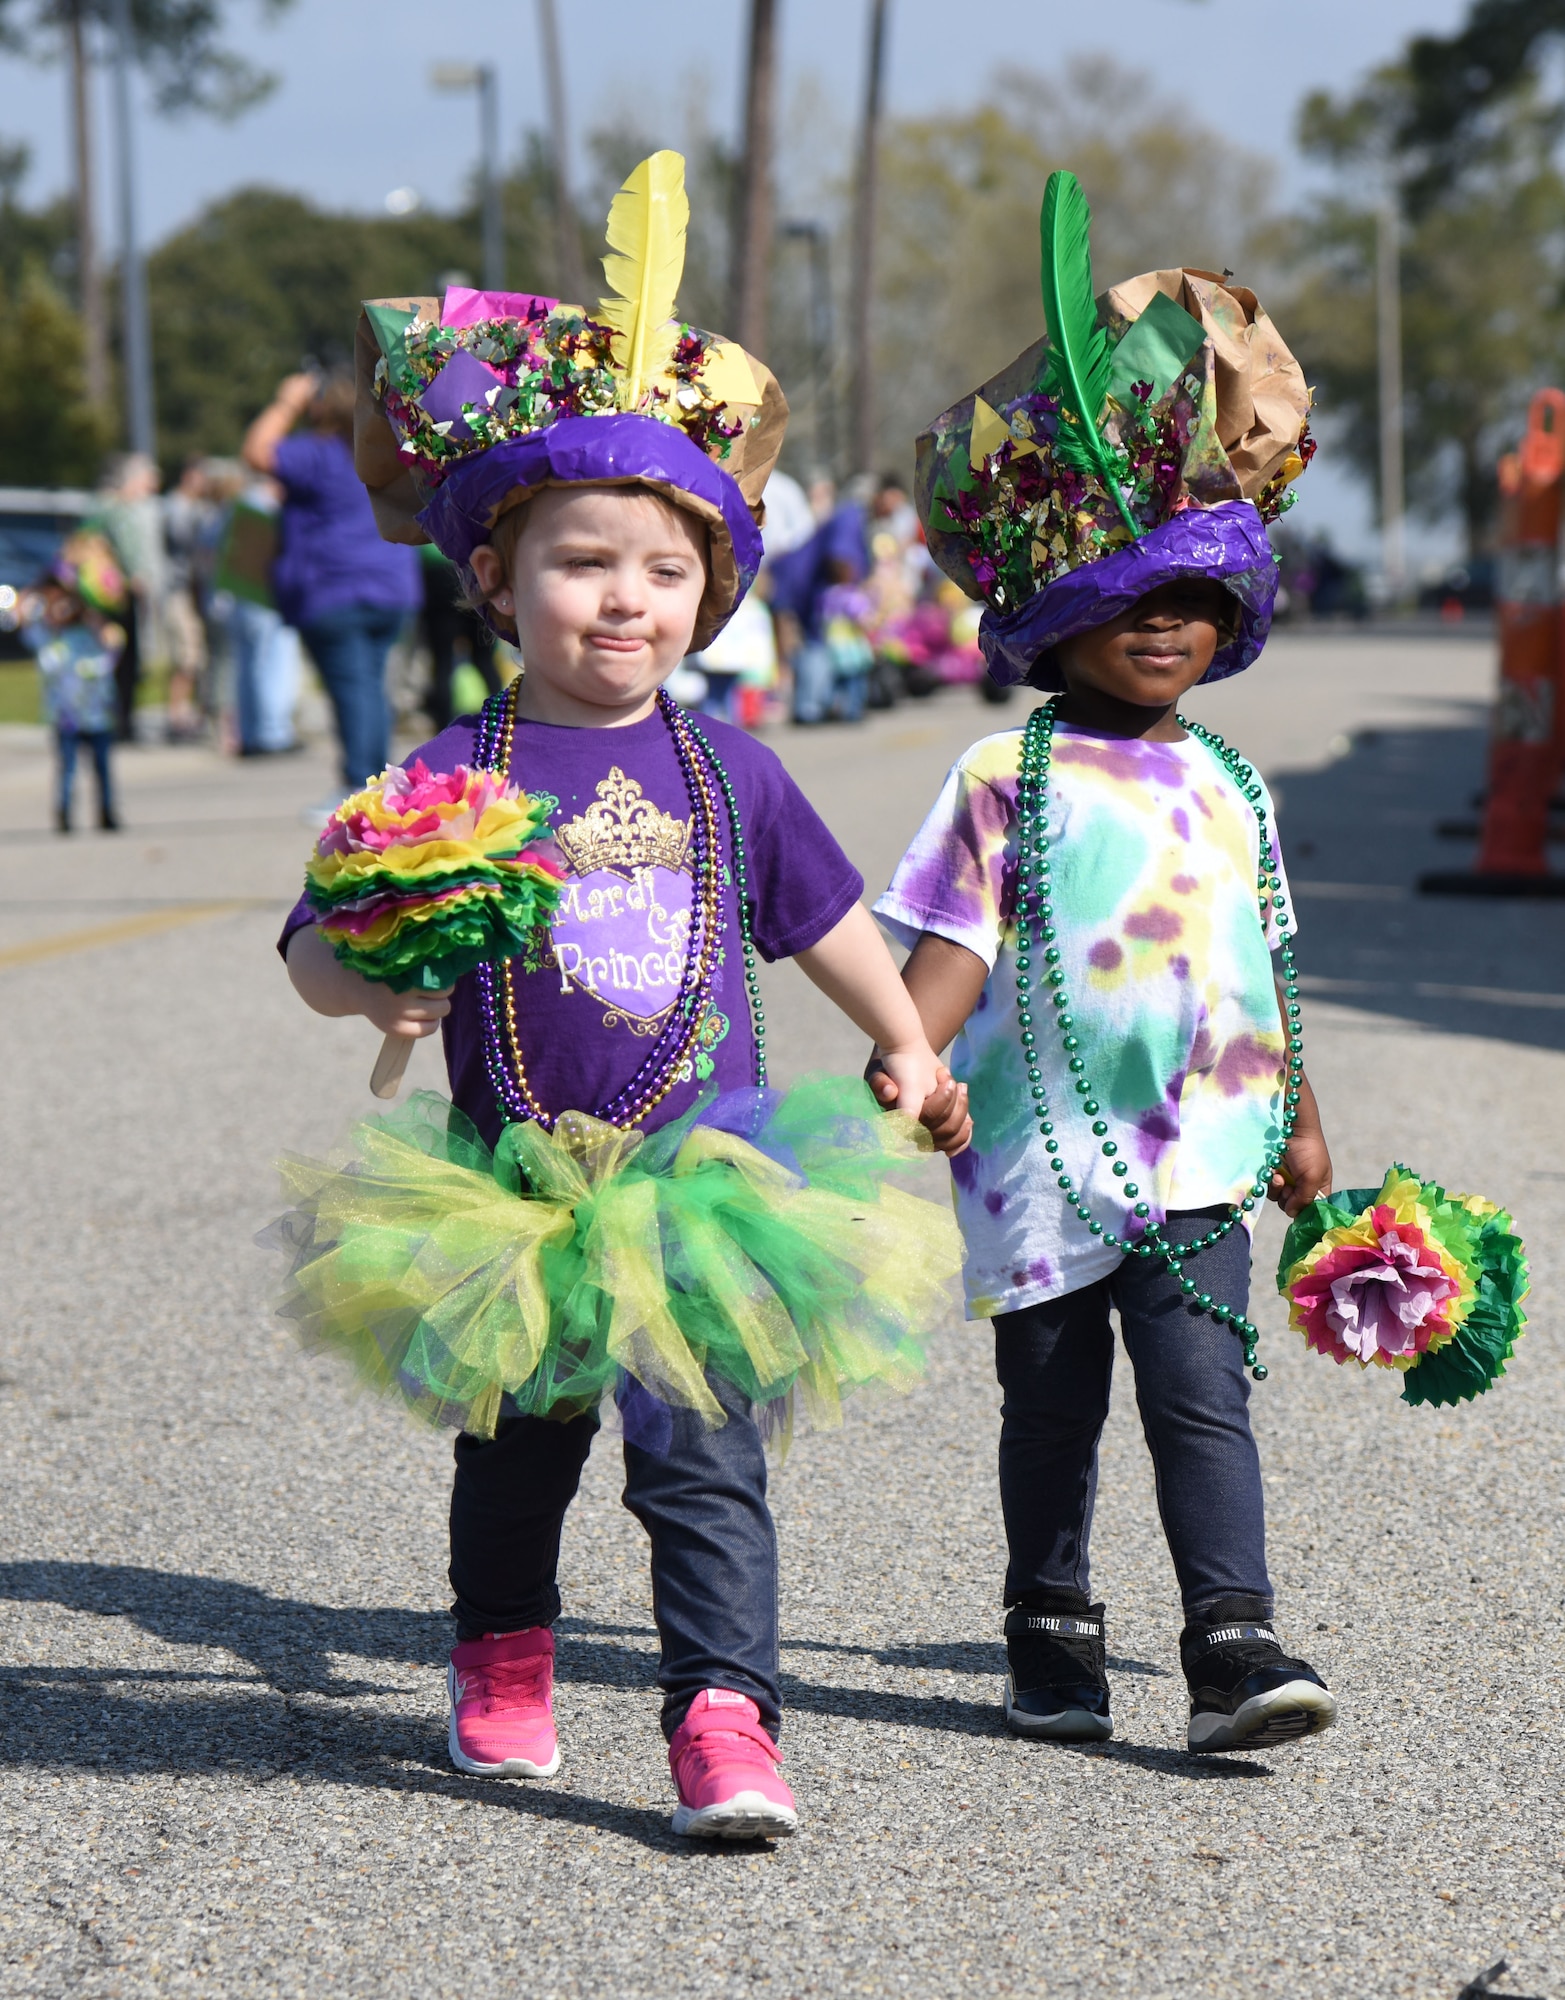 Aubrey Messerschmidt, daughter of Staff Sgt. Ruth Messerschmidt, 81st Surgical Operations Squadron general surgery clinic NCO in charge, and Ariah Lambert, daughter of Senior Airman Mia Lambert, 81st Medical Operations Squadron medical technician, walk hand in hand during the Keesler Child Development Center Mardi Gras parade Feb. 28, 2017, on Keesler Air Force Base, Miss. More than 300 children participated in the event, which started in 2009. (U.S. Air Force photo by Kemberly Groue)